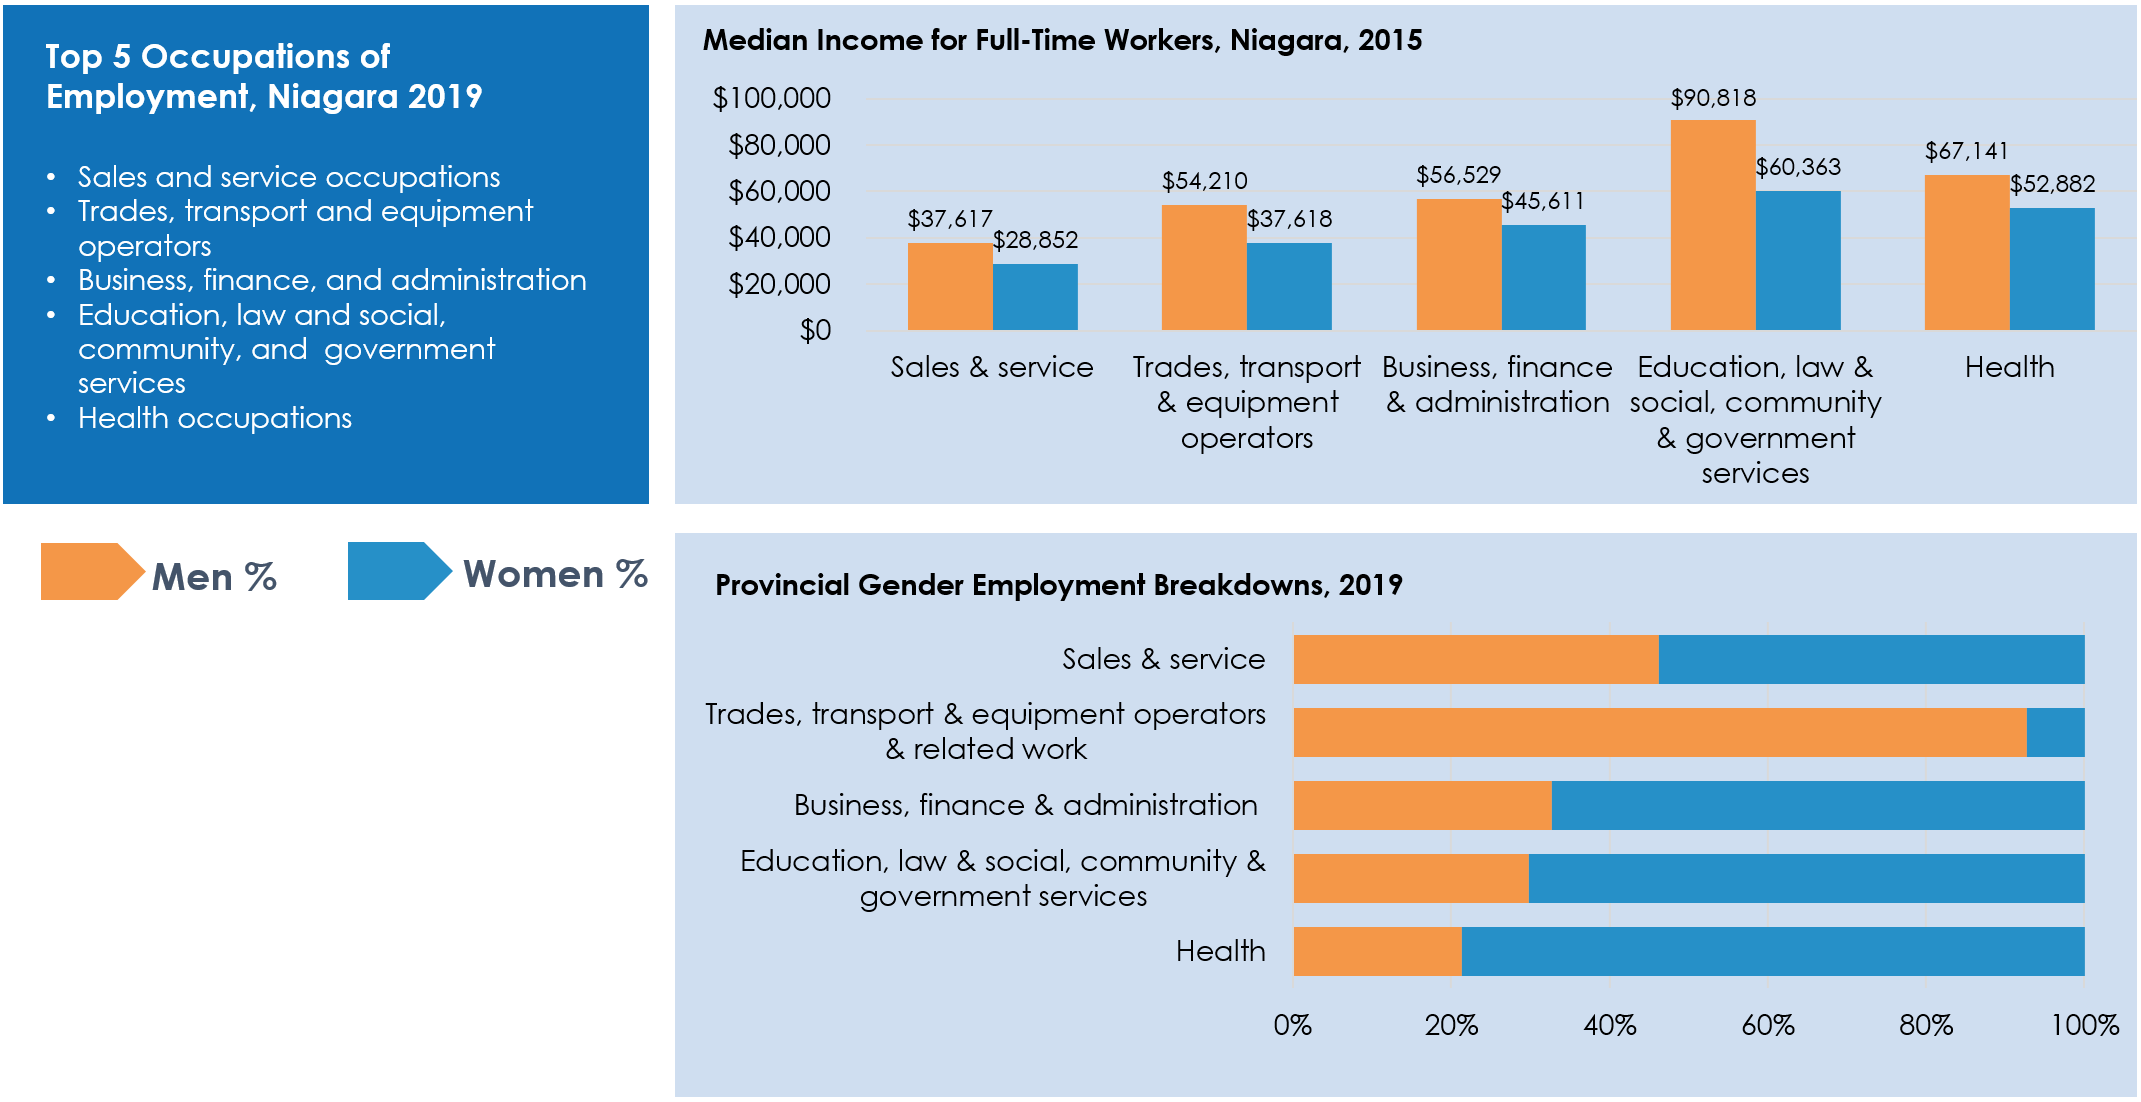 Infographic showing the following data: The top 5 occupations of employment in Niagara, 2019, were sales & service; trades, transport & equipment operators; business, finance & administration; education, law & social, community & government services; and health. Men's median income tended to be between $10,000 and $30,000 more than women's median income within these fields, with the largest gap in education, law & social, community & government services. Women tend to represent the majority of those employed in these fields, with the exception of trades, transport & equipment operators & related work - over 90% of people working in this occupation are men. Women tend to be more represented in health at roughly 80%; education, law & social, community & government services and business, finance & administration at closer to 75%. In sales & service the numbers are closer to equal, with women representing roughly 60% of this workforce.